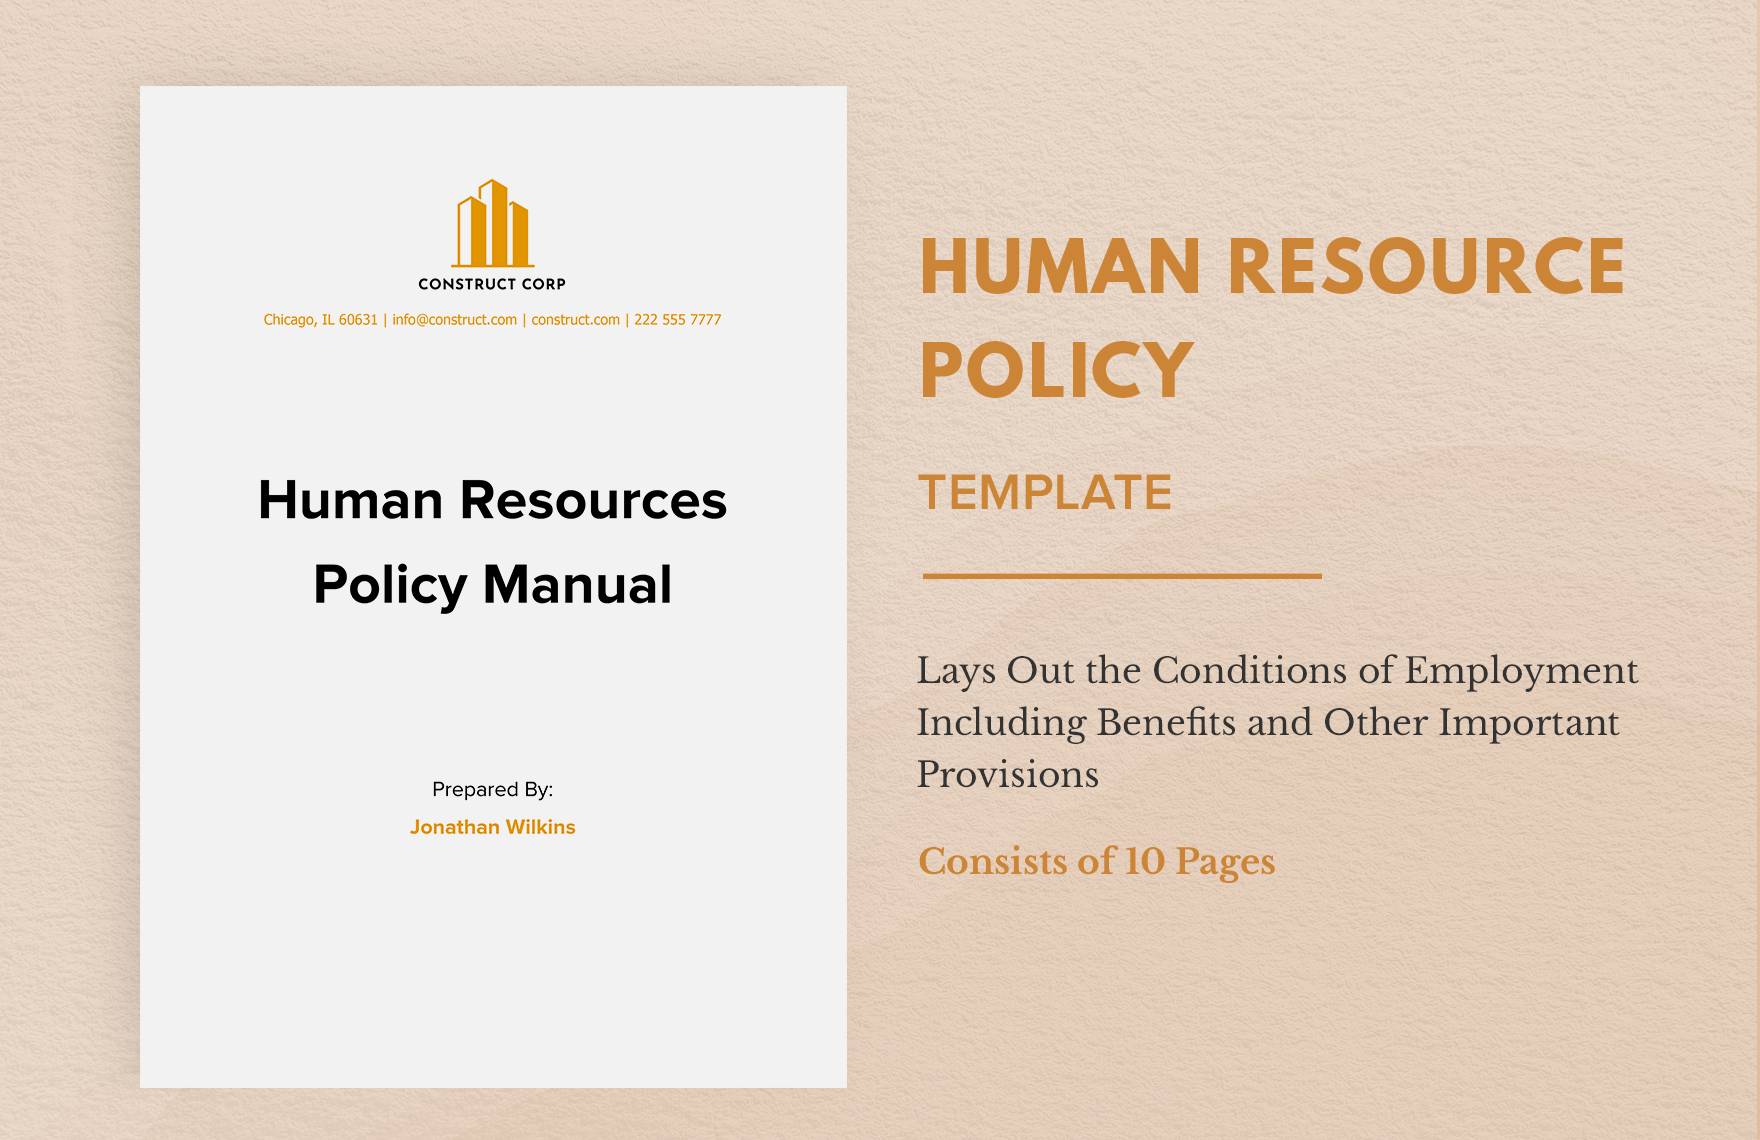 HR Policy Template